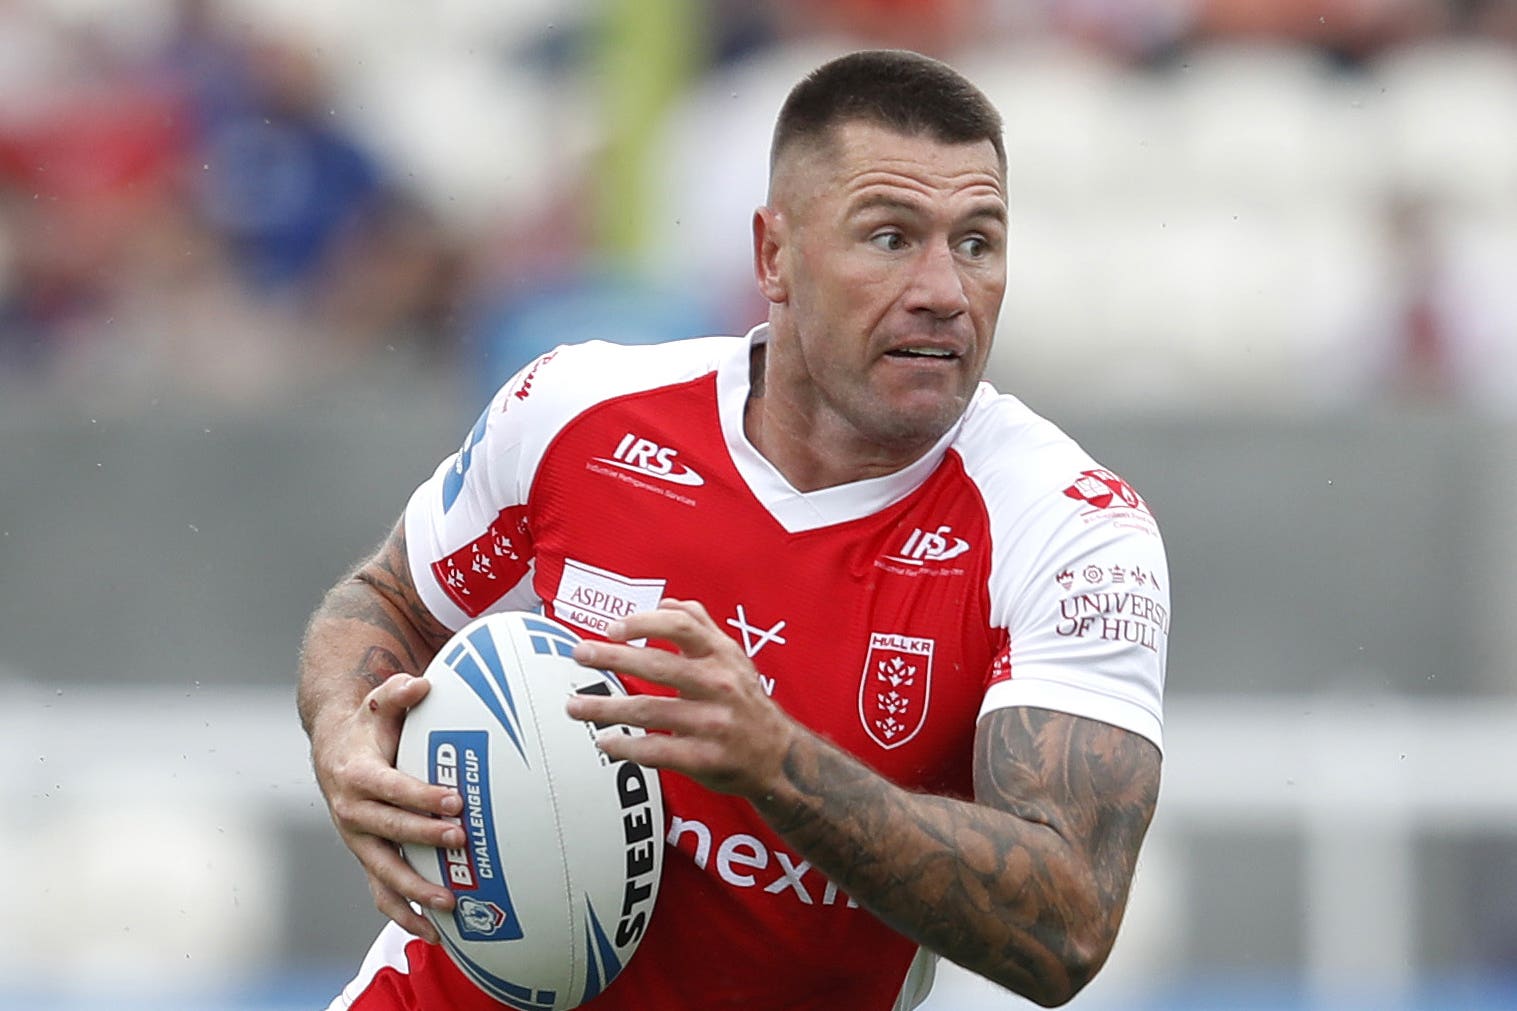 Hull KR captain Shaun Kenny-Dowall hoping to top off career with Wembley win The Independent